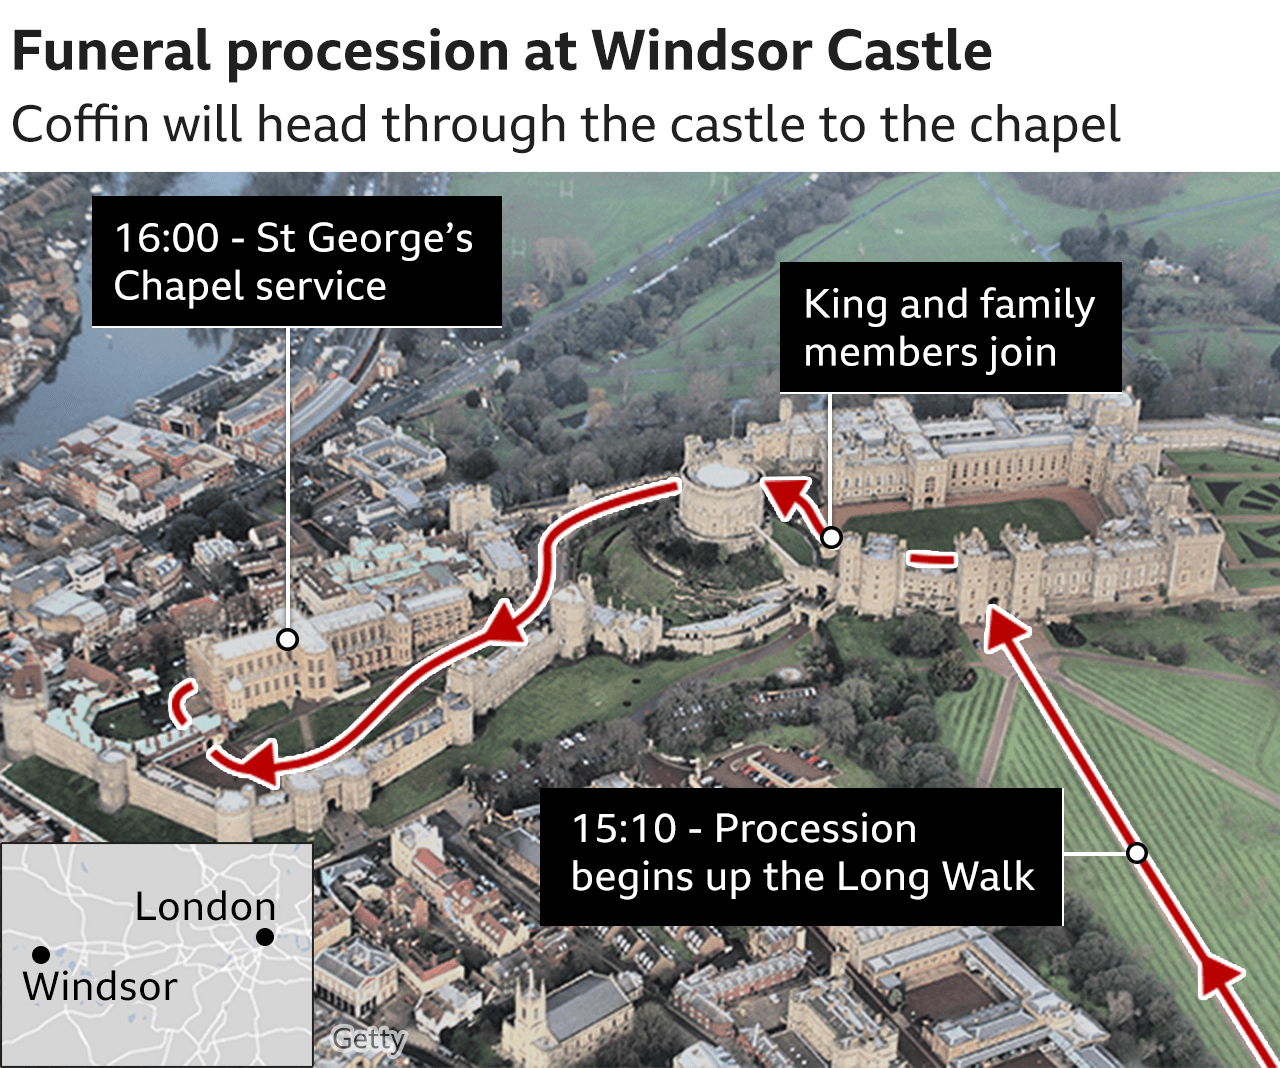 Route showing final section of the Queen's funeral procession